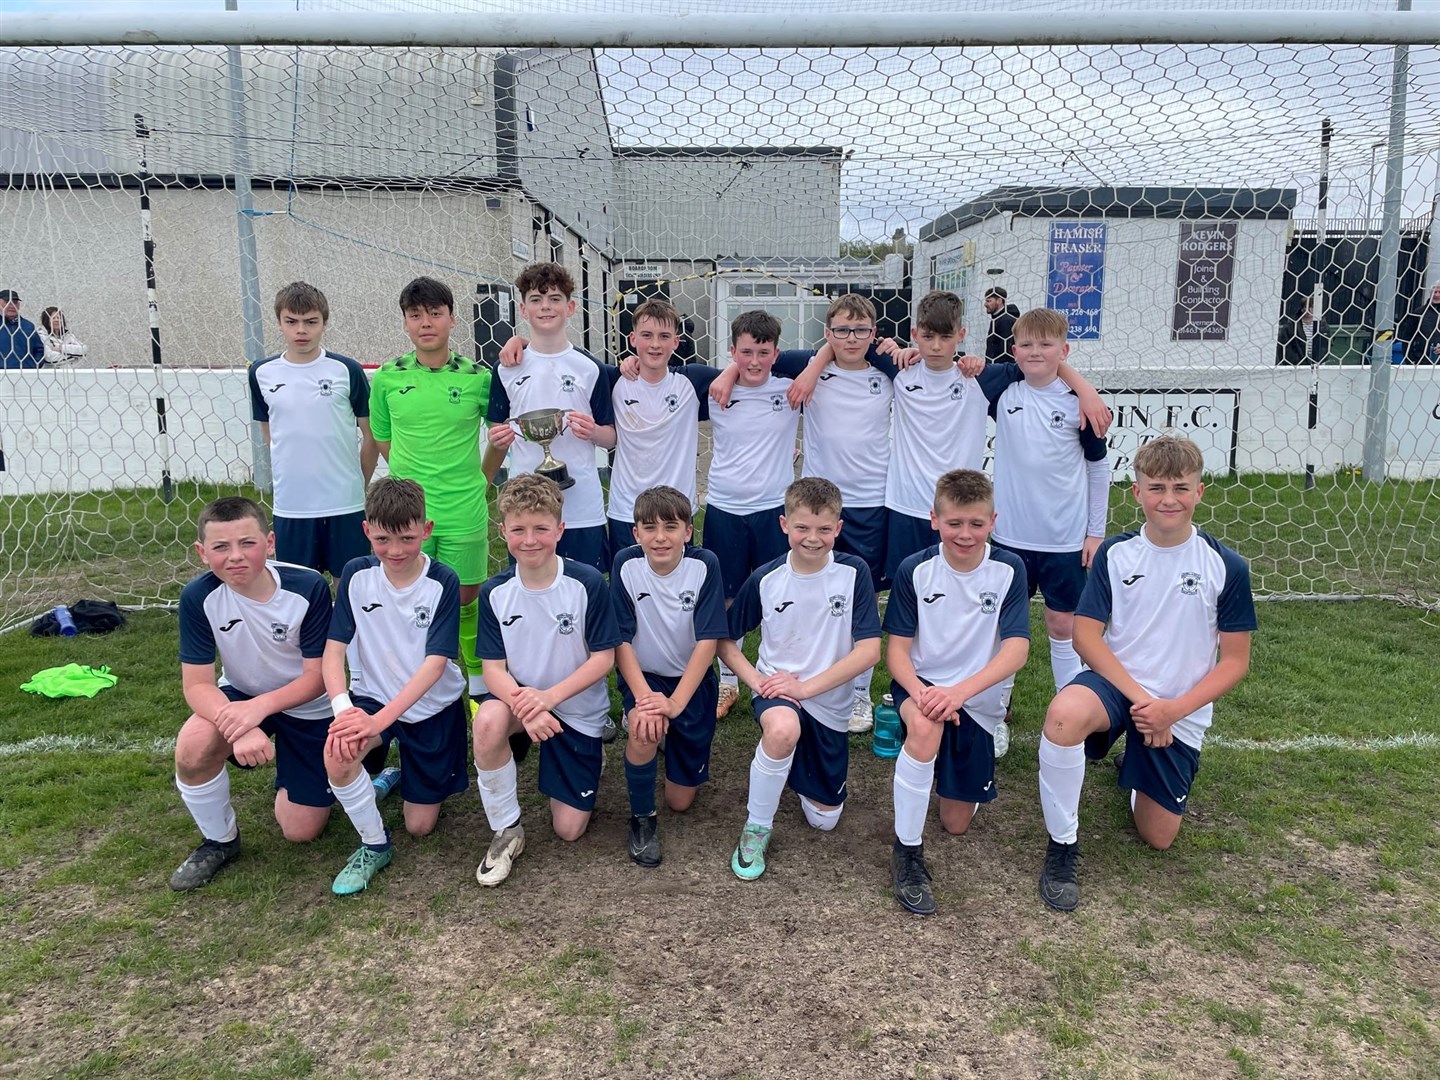 Dingwall Academy first year team won the Under-13 North of Scotland Cup.